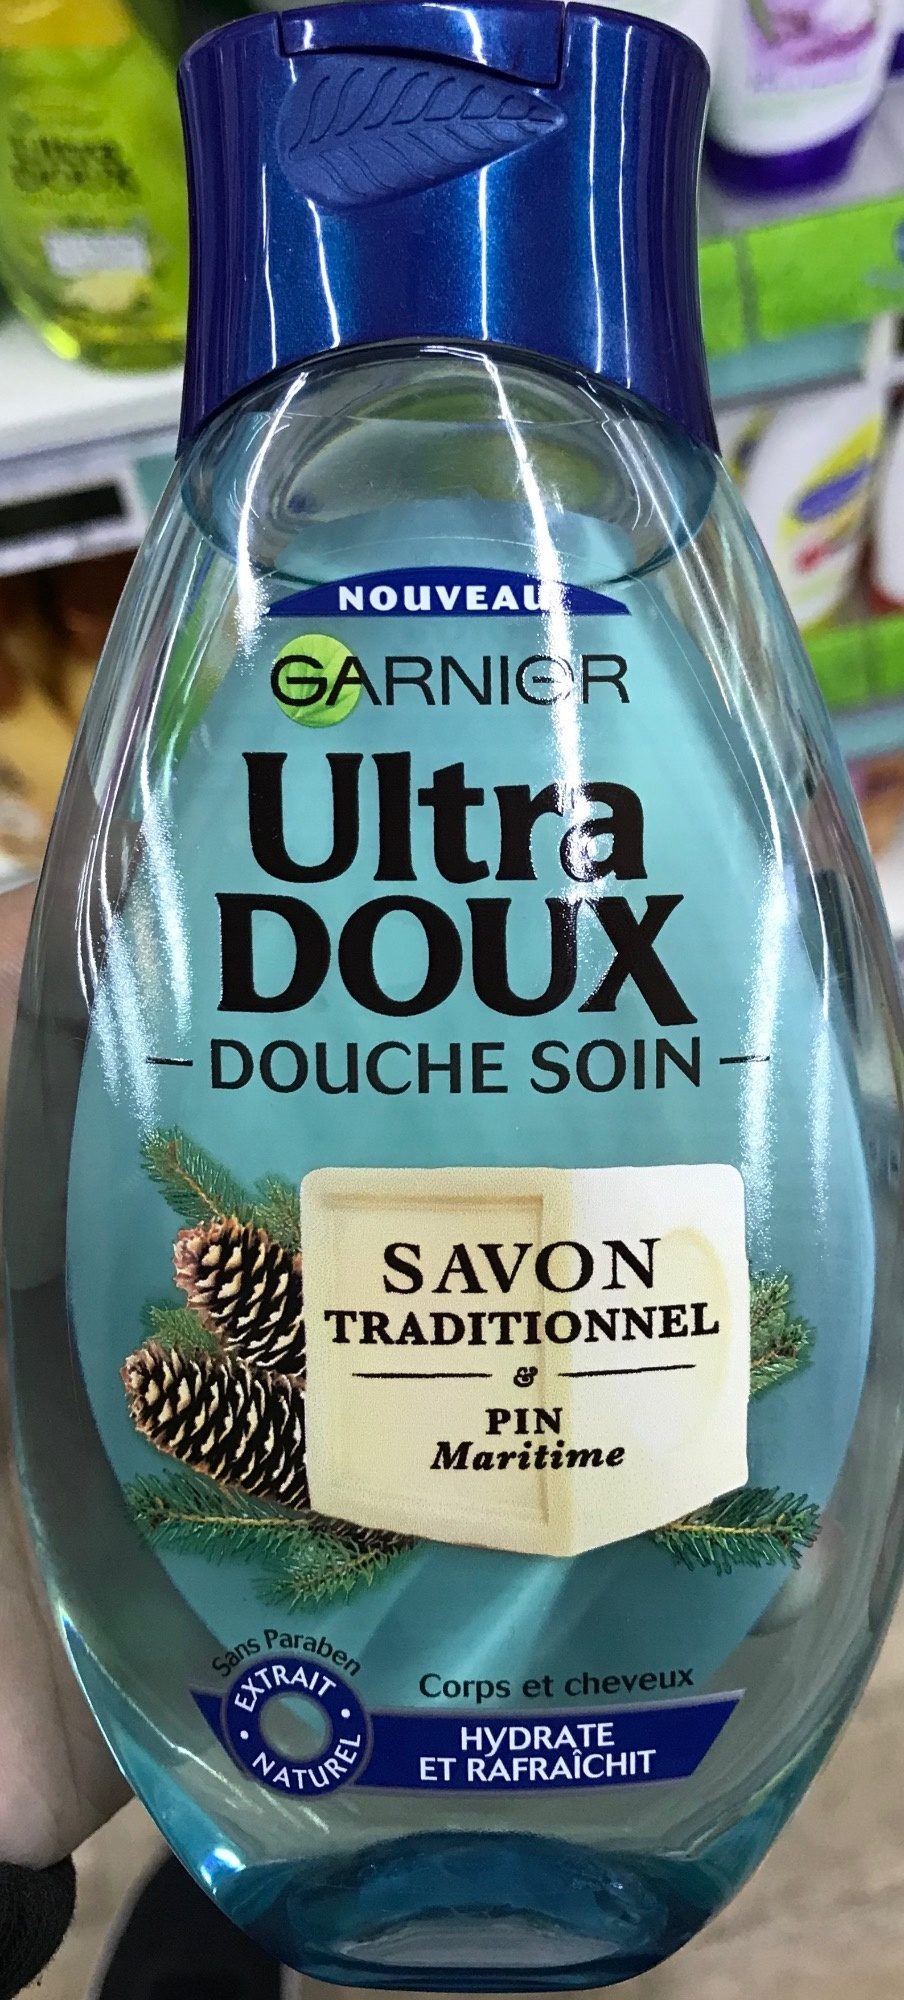 Ultra Doux Douche Soin Savon traditionnel & Pin Maritime - Product - fr